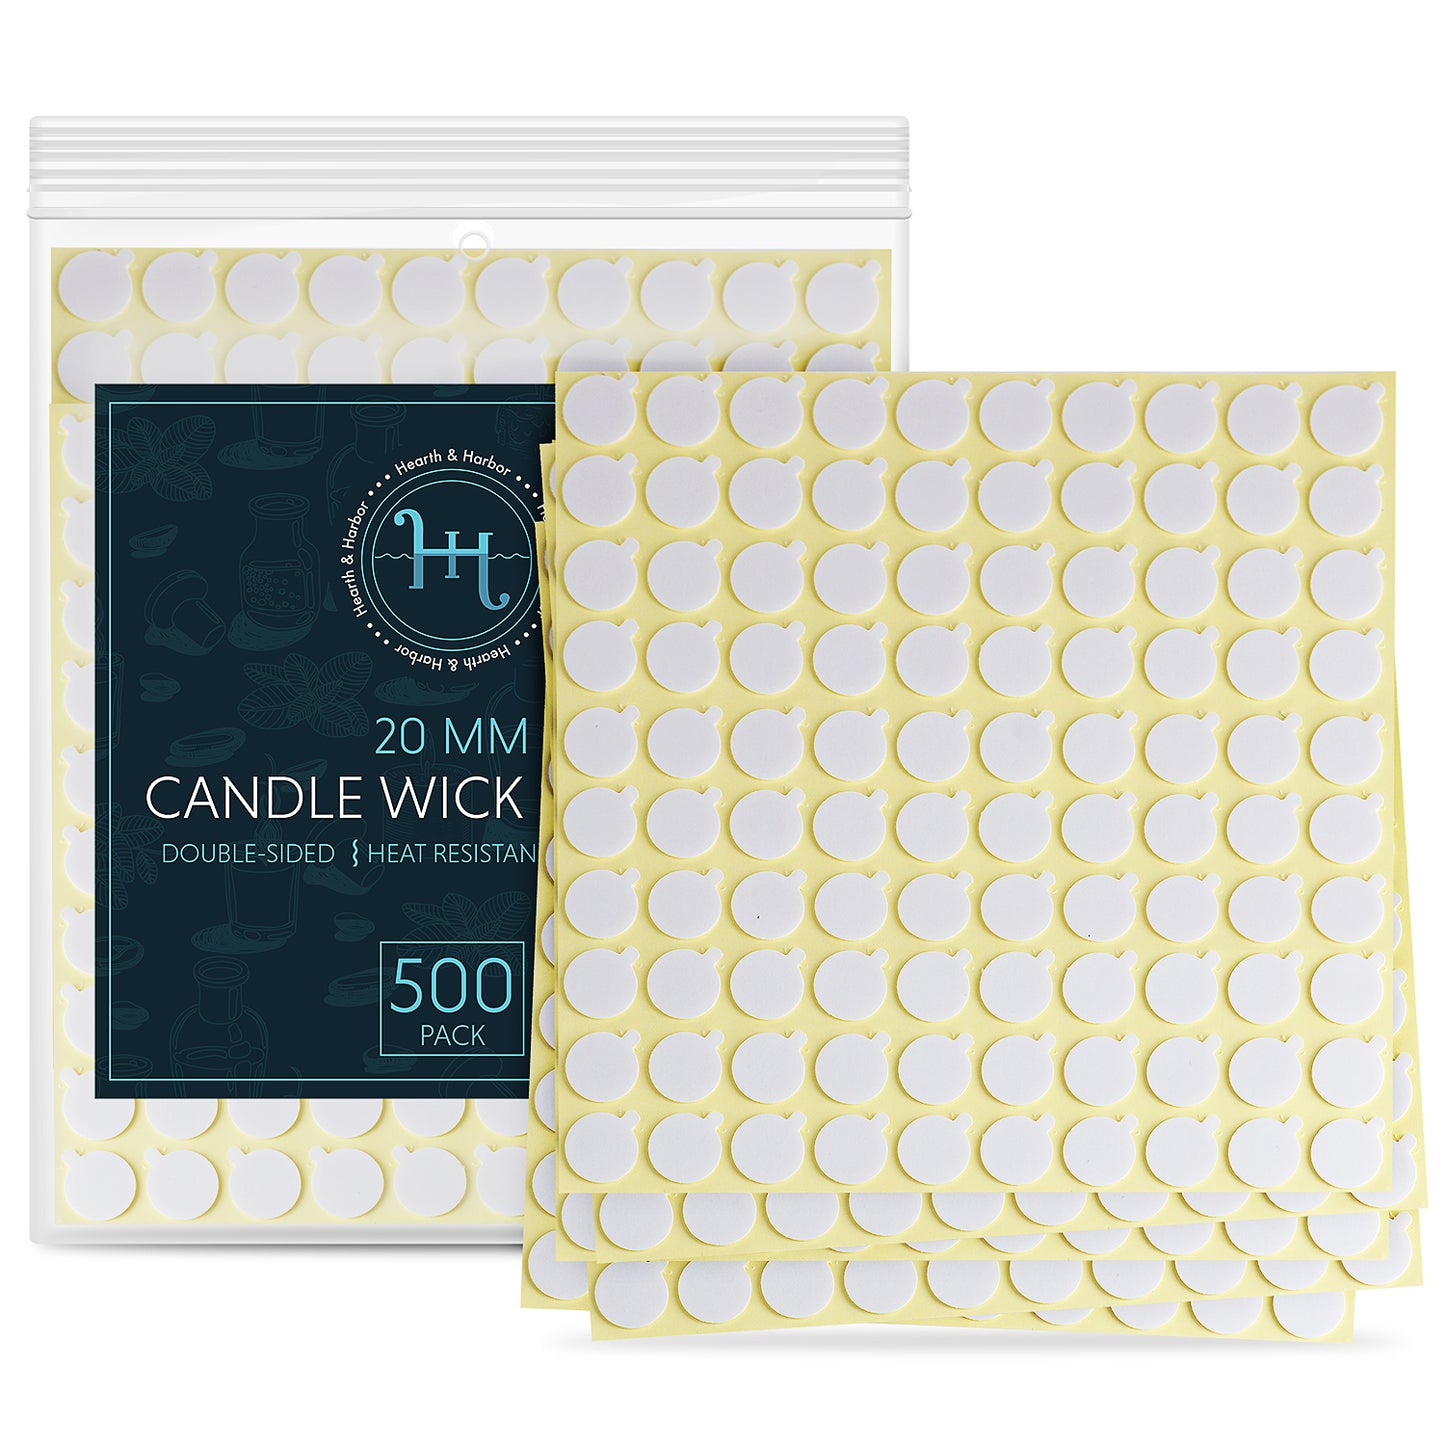 Hearth & Harbor Candle Wick Stickers - 500-Pack of Double-Sided Adhesive Candle Stickers - 20mm Diameter Round Heat-Resistant Adhere Stable